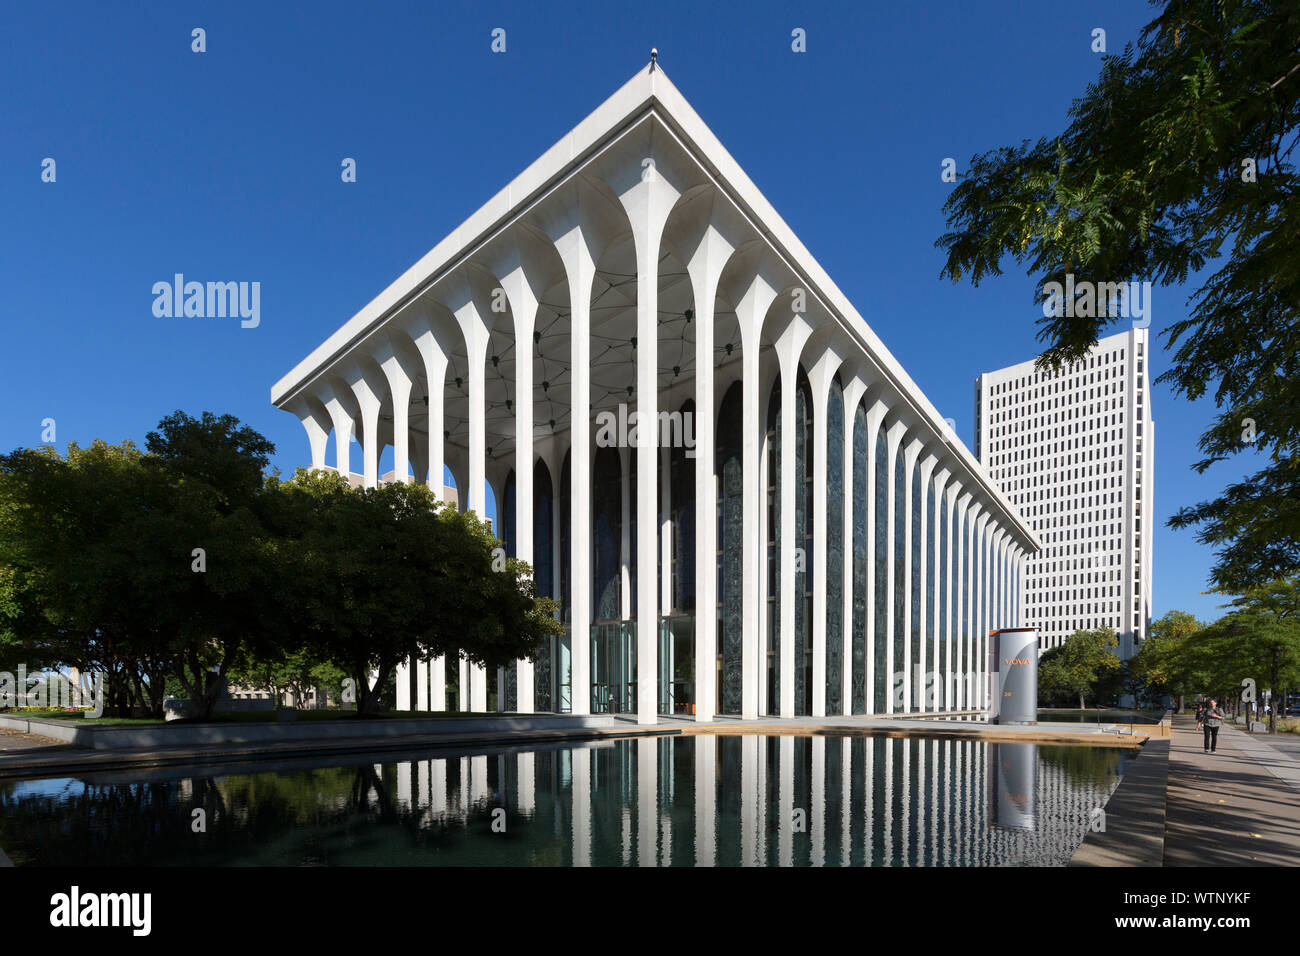 The 1960s Mid-century modern Northwestern National Life building designed by architect Minoru Yamasaki located in downtown Minneapolis, Minneosta.  Th Stock Photo